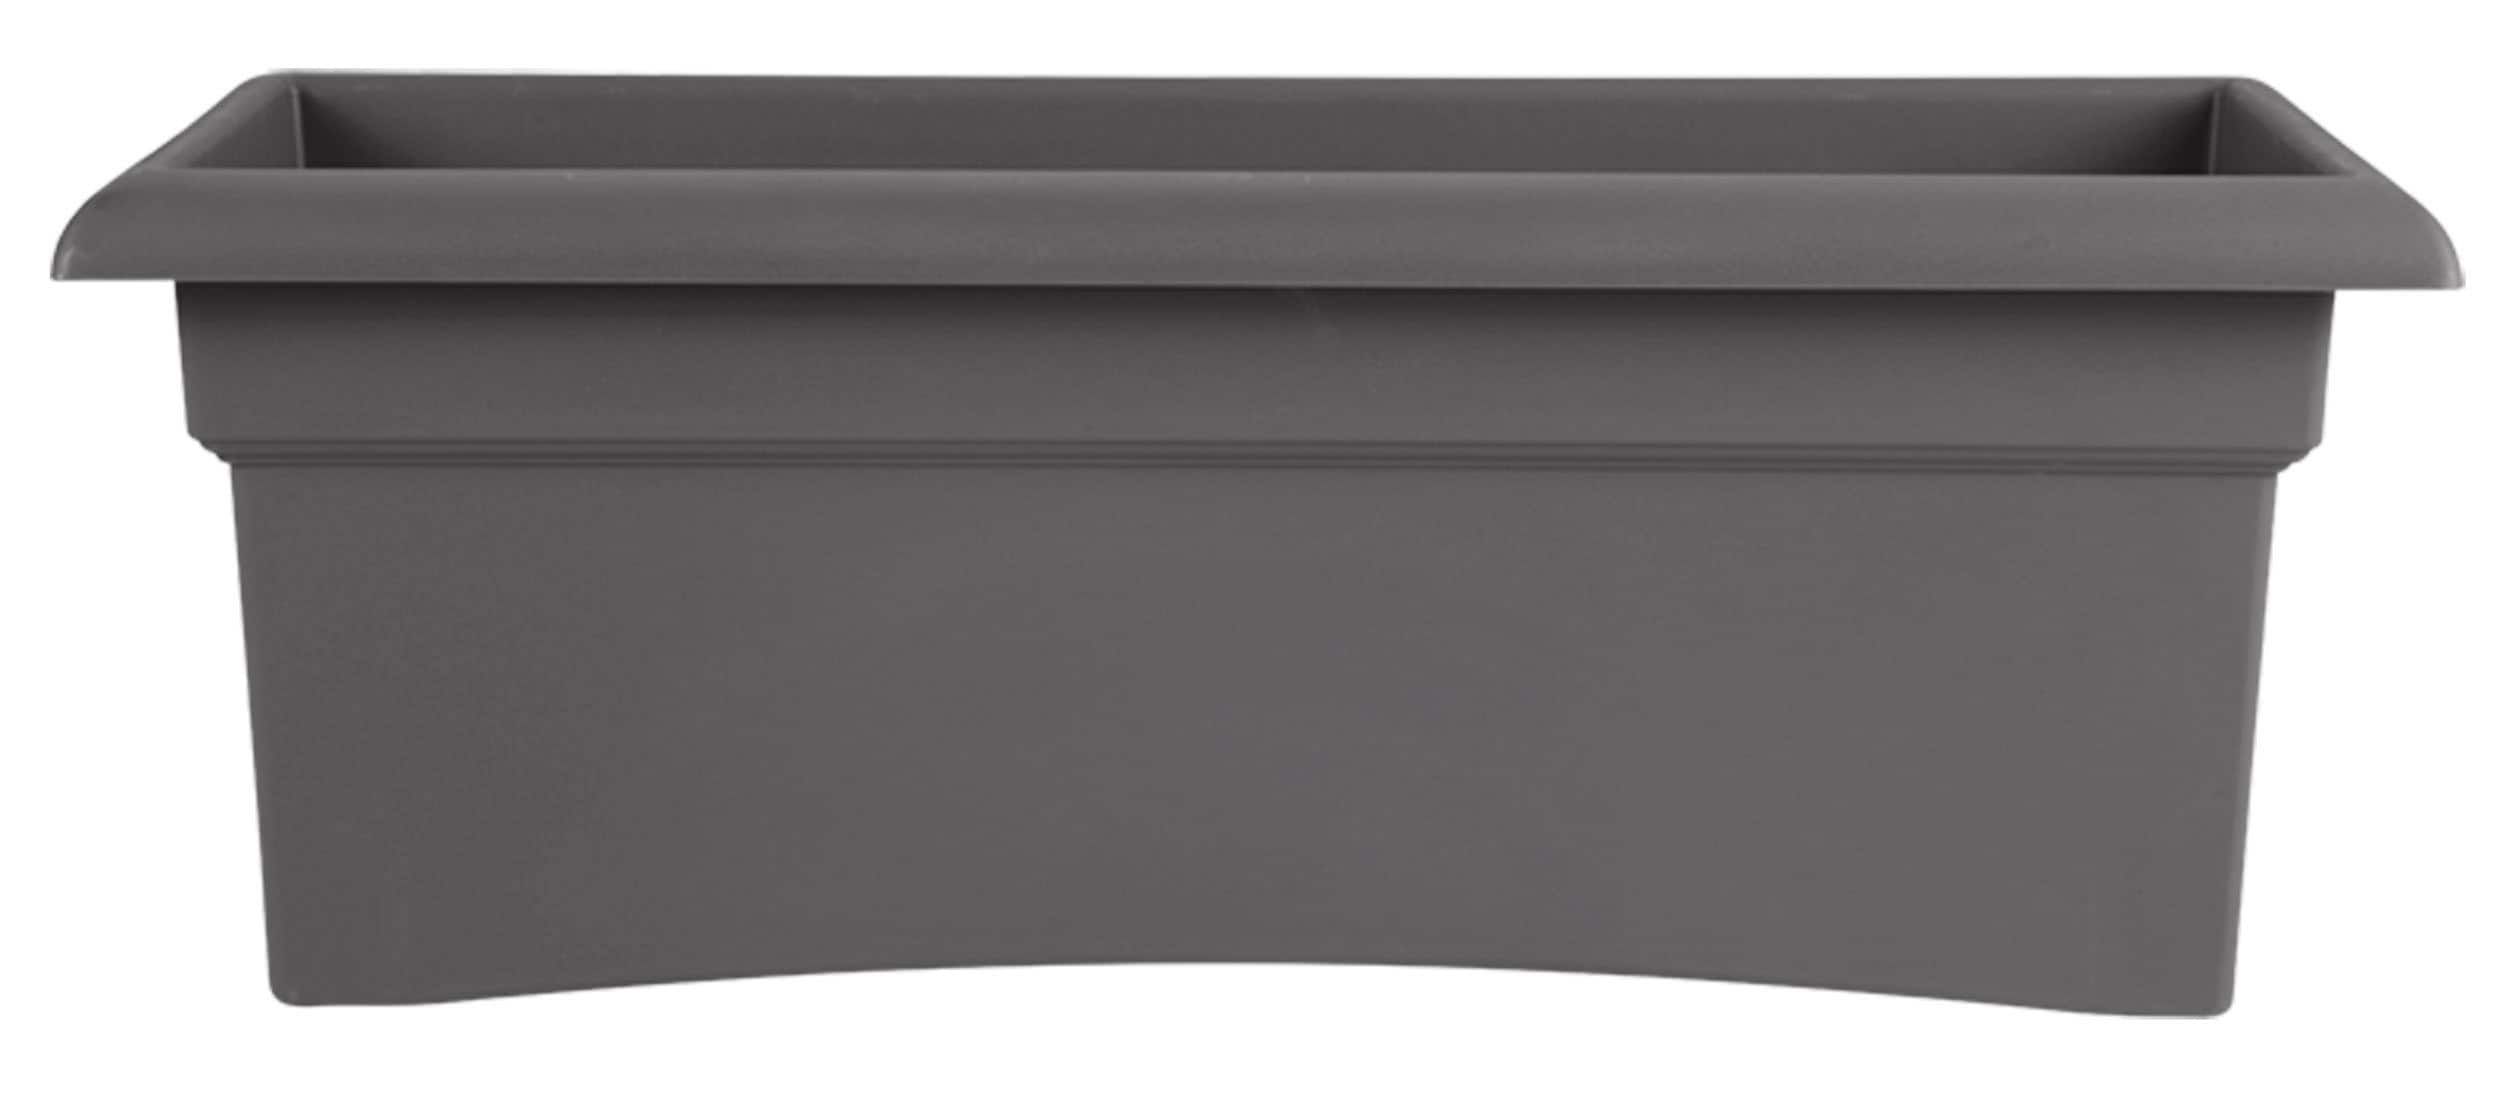 Bloem 26.5-in W x 10-in H Charcoal Resin Traditional Indoor/Outdoor Deck Box in the & Planters Lowes.com